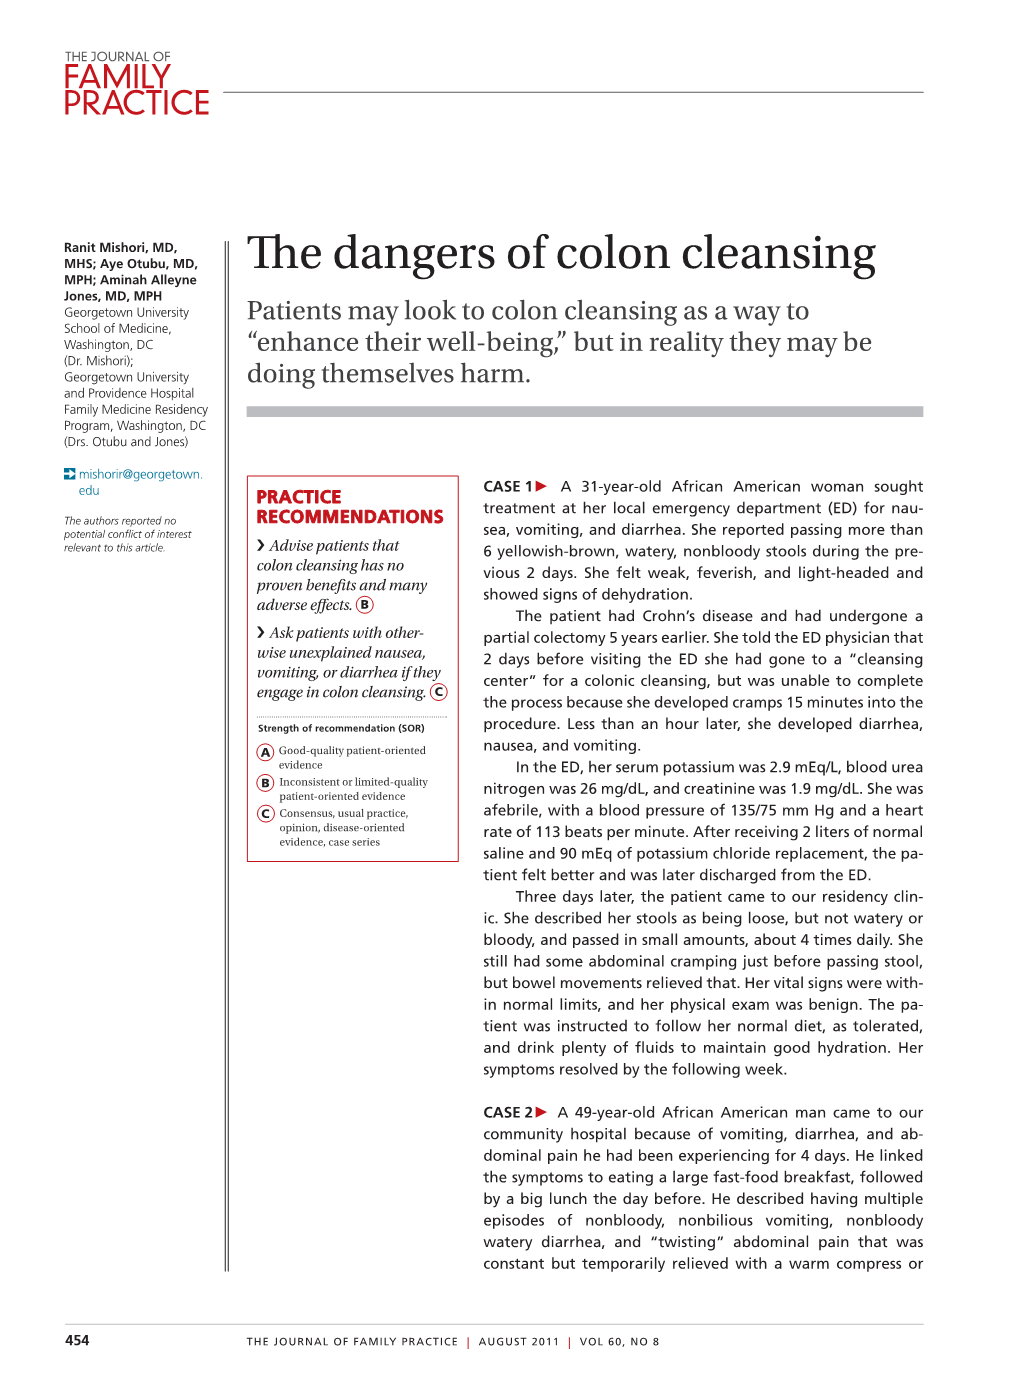 The Dangers of Colon Cleansing